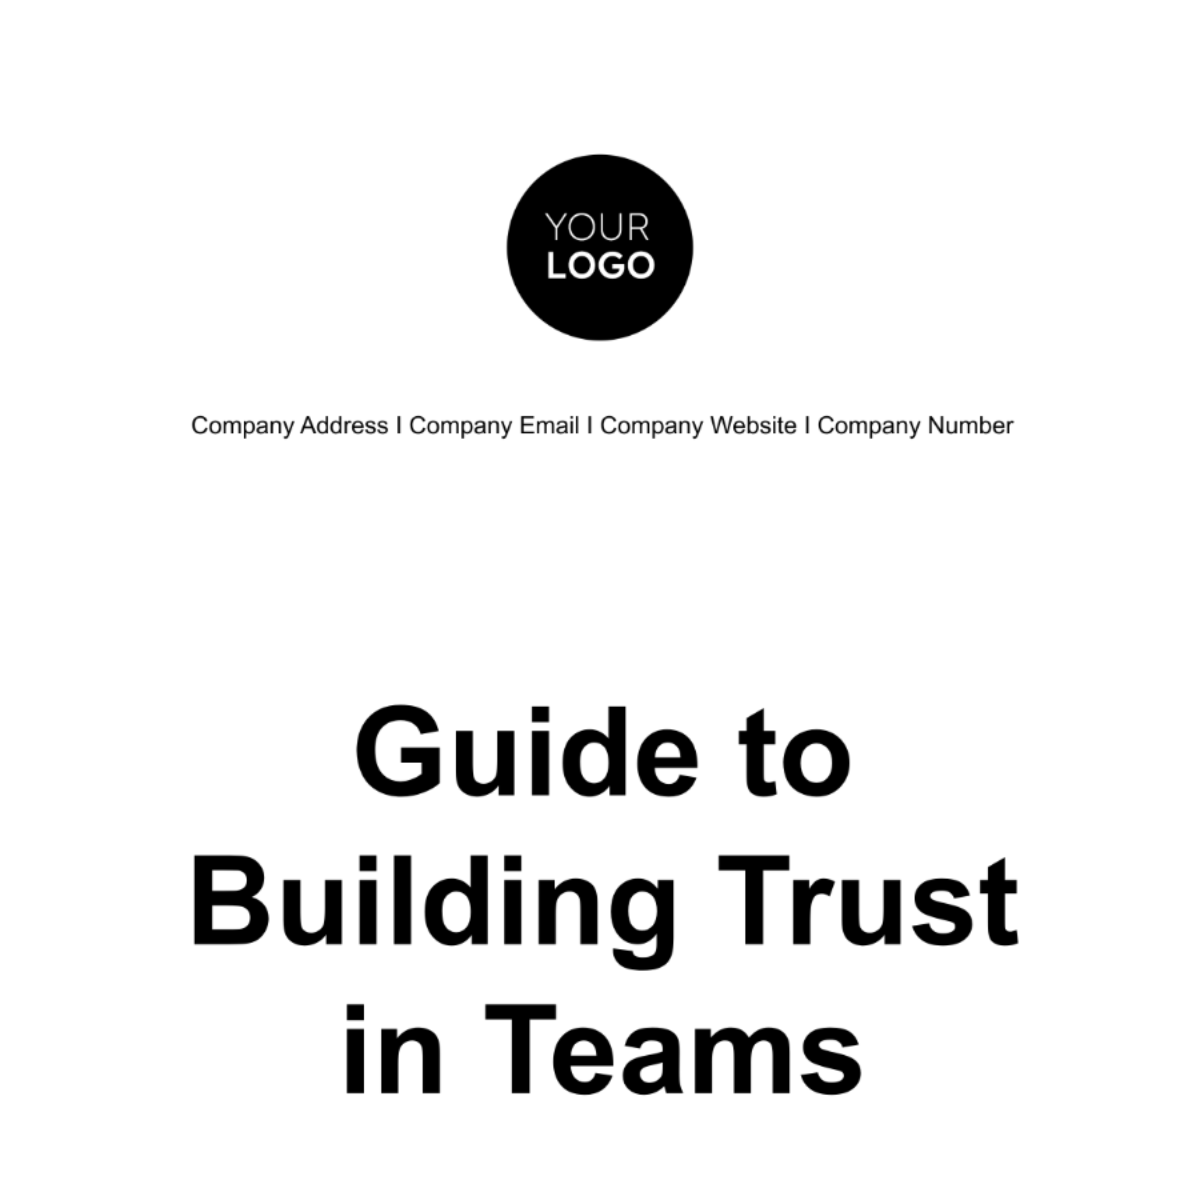 Guide to Building Trust in Teams HR Template